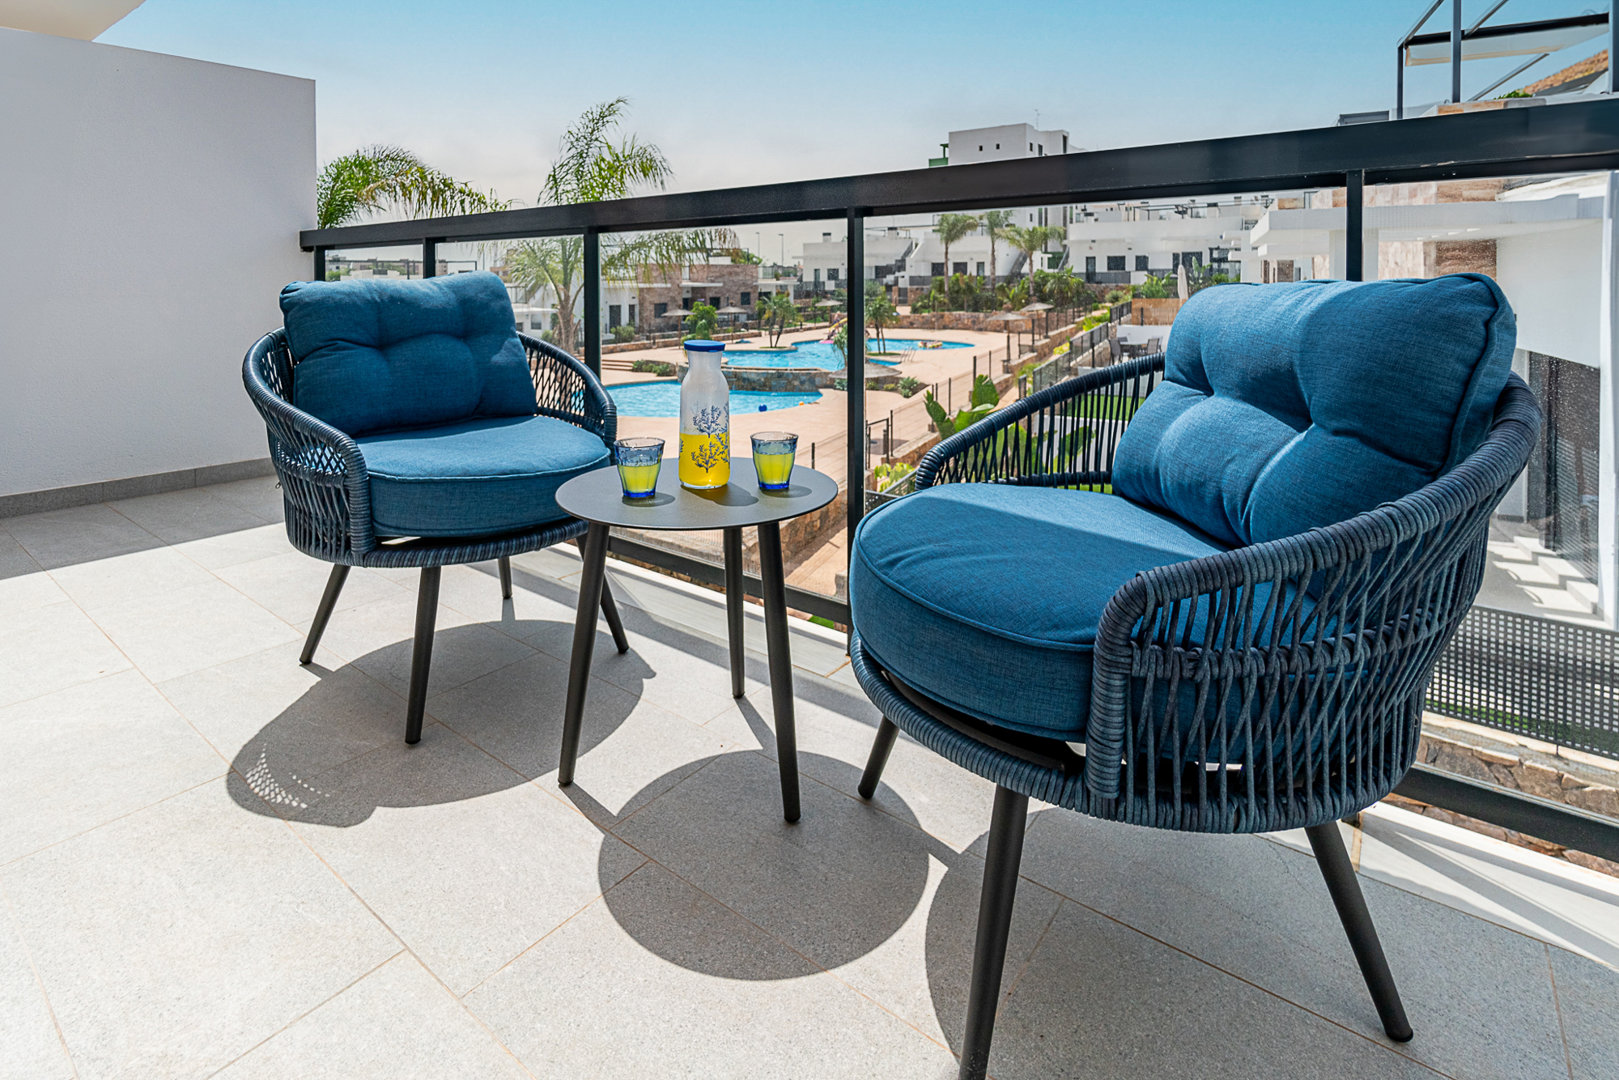 APARTMENT AZUL - With a private terrace 